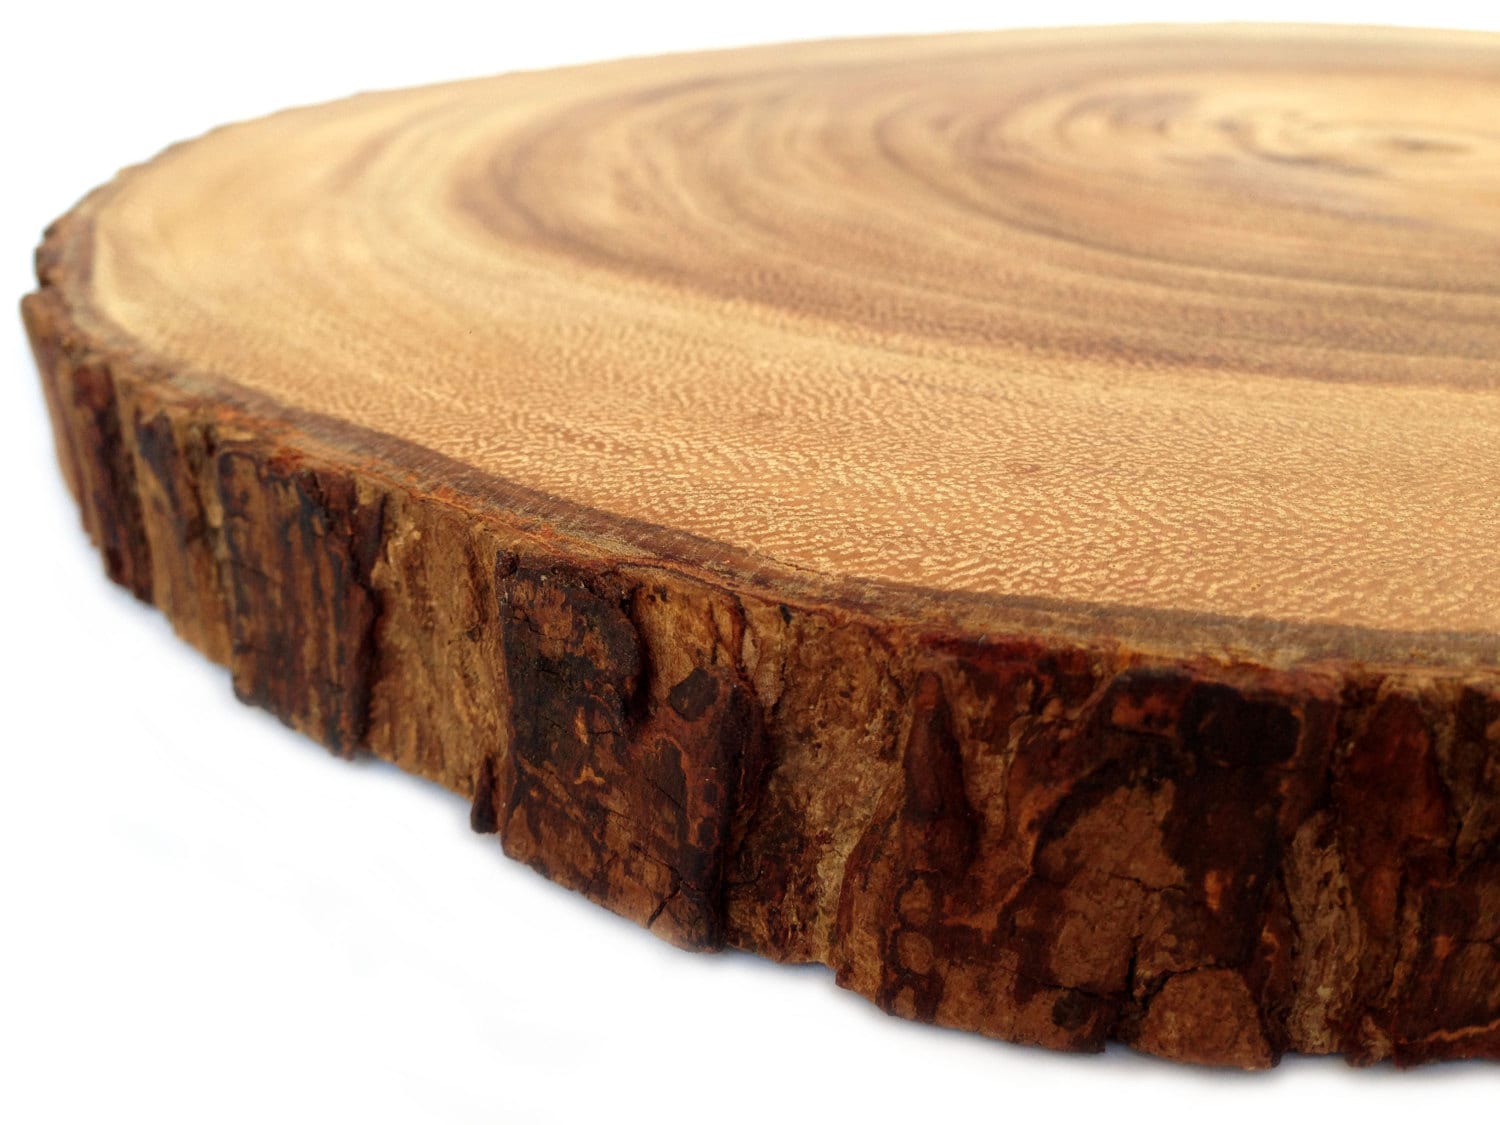 How To Create This Rustic Tree Trunk Chopping Board — MELANIE